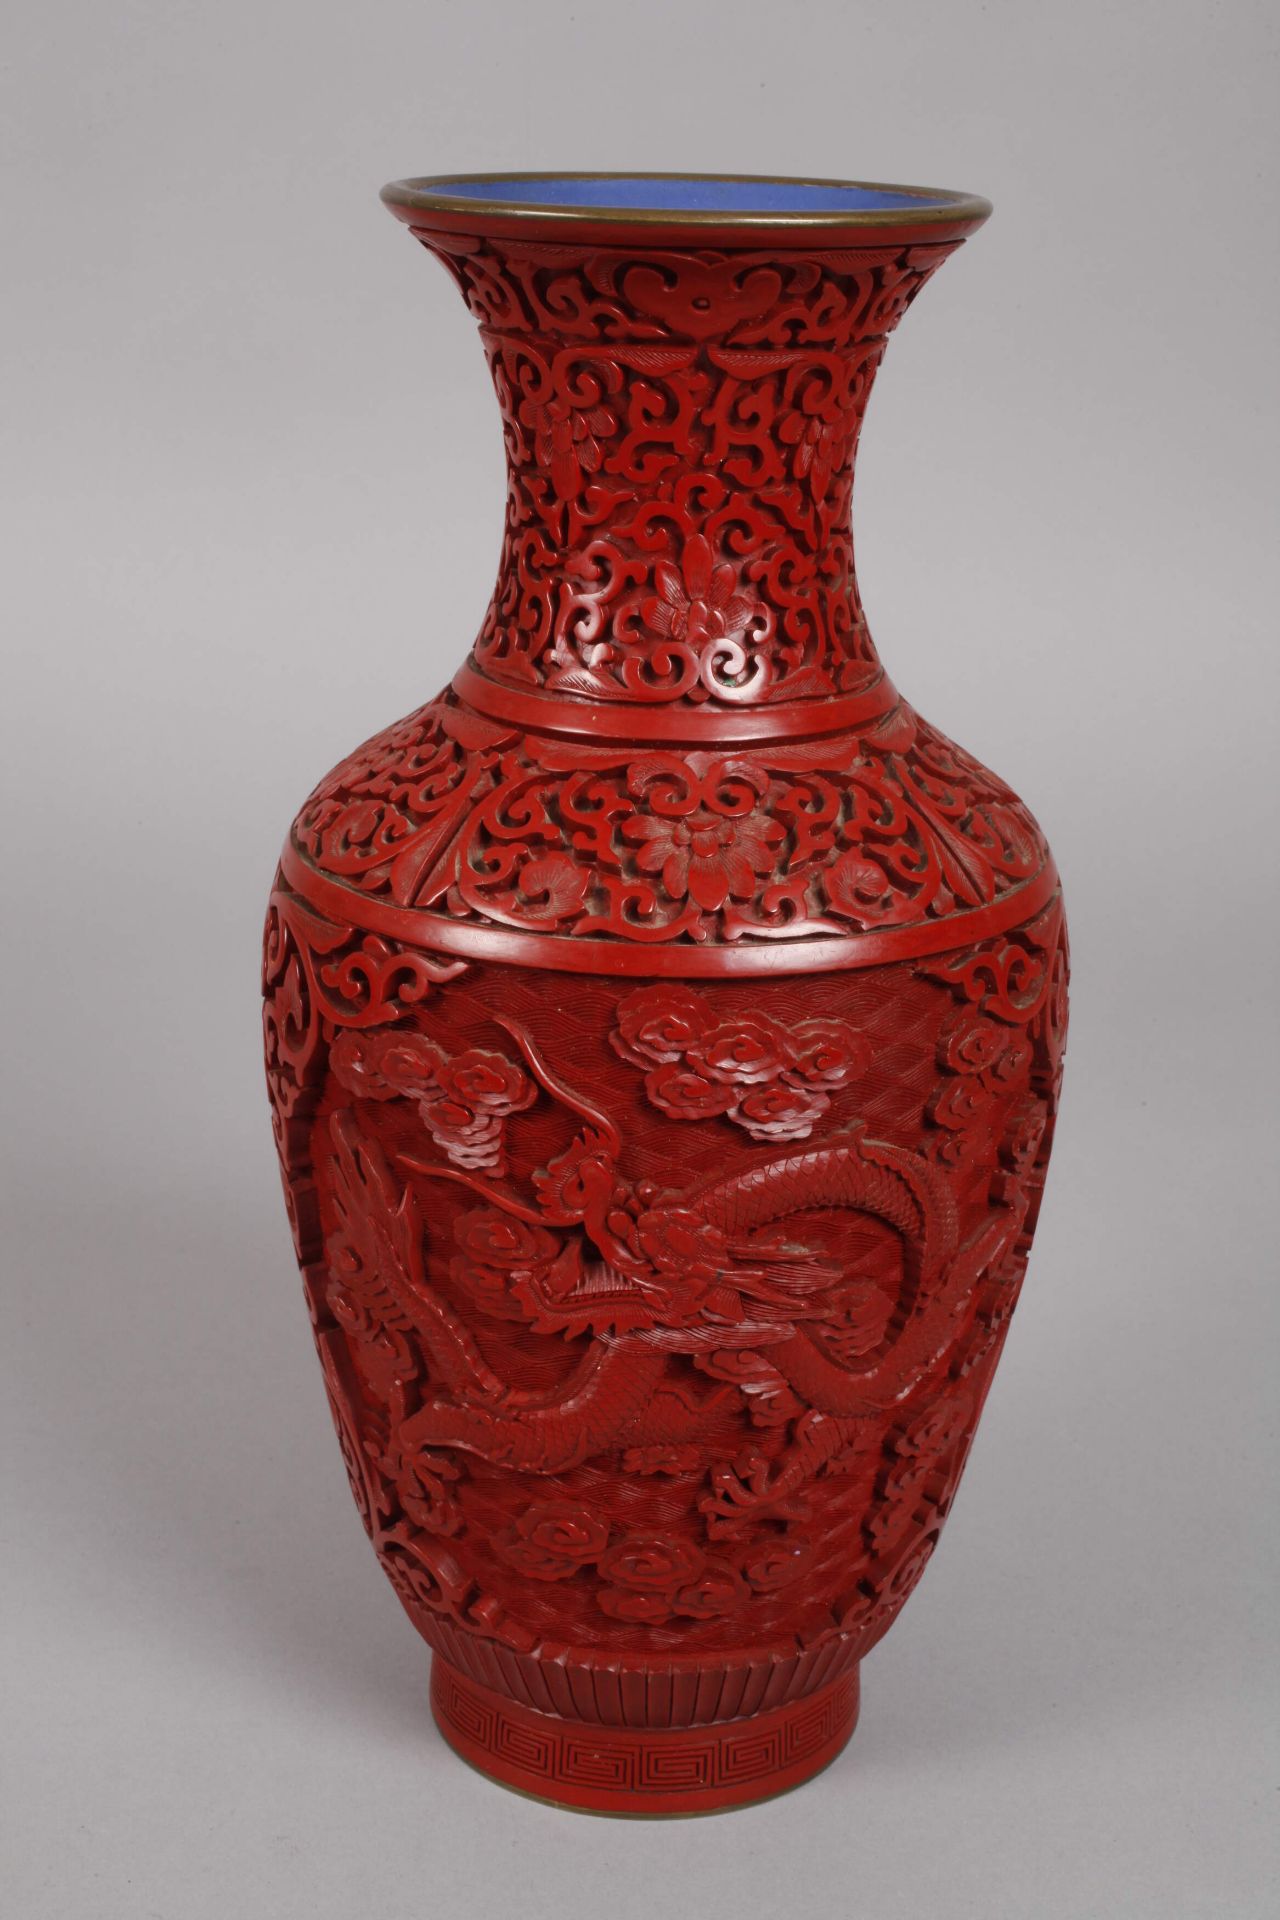 Pair of vases, lacquer carving - Image 4 of 6